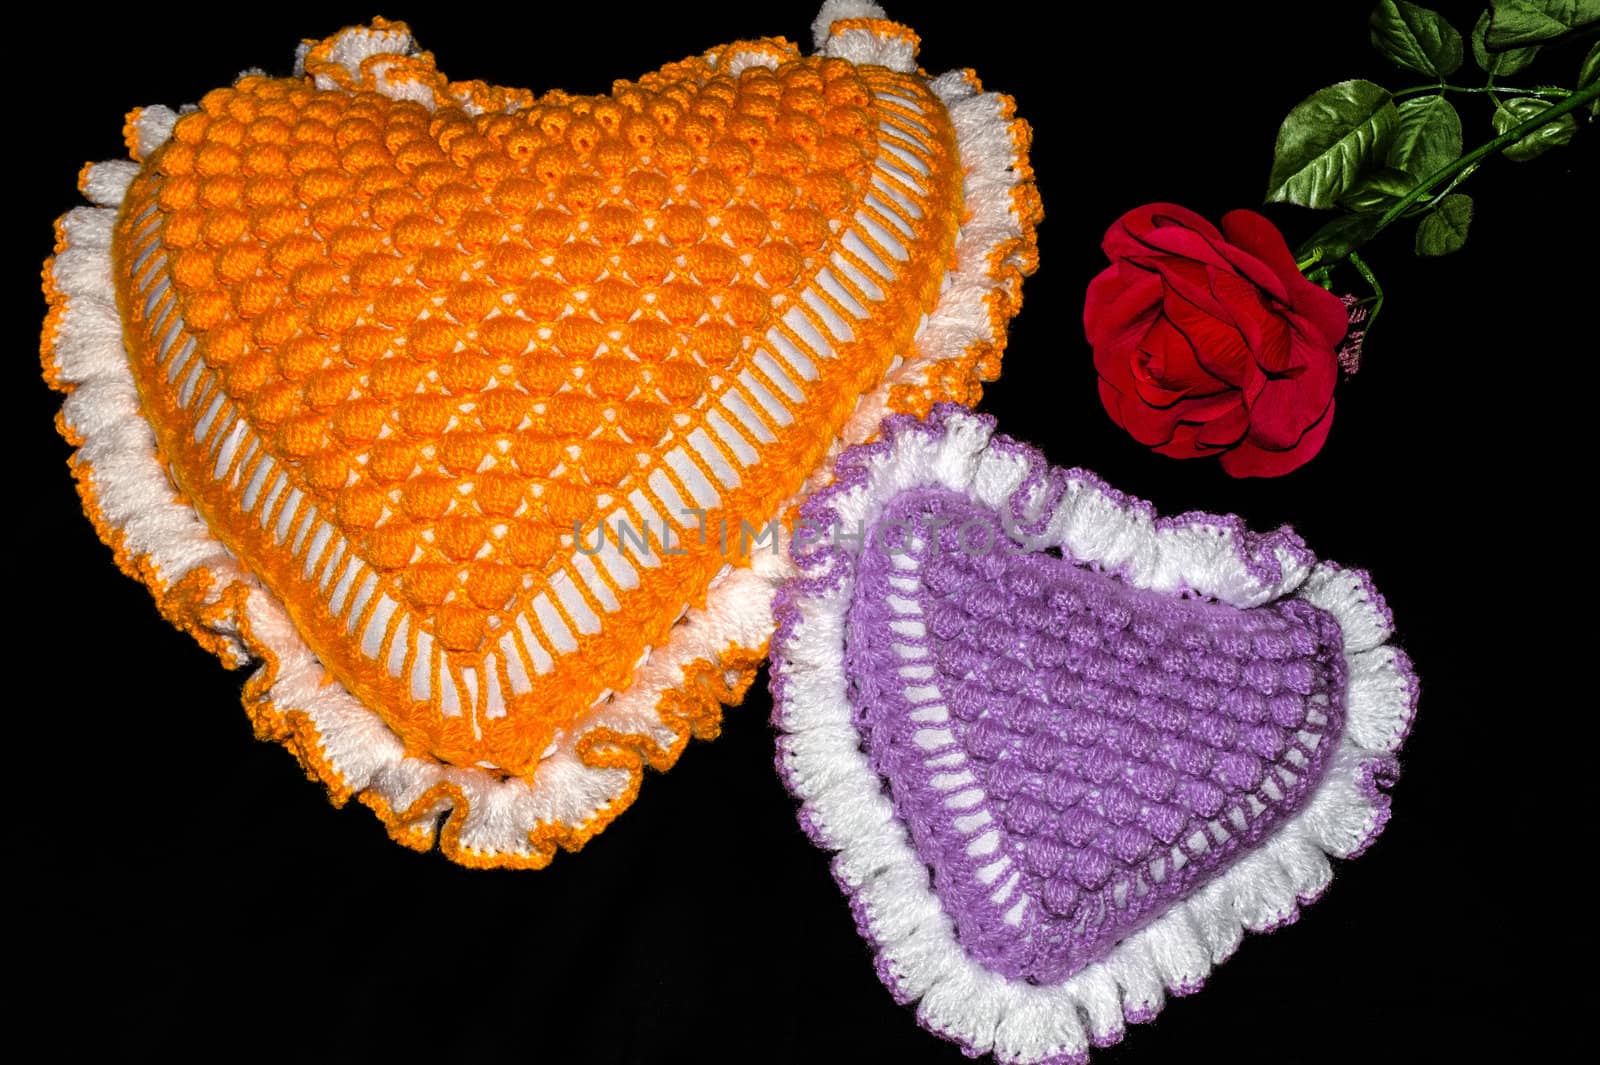 Two pillows in the shape of a heart and a flower rose on a black background.